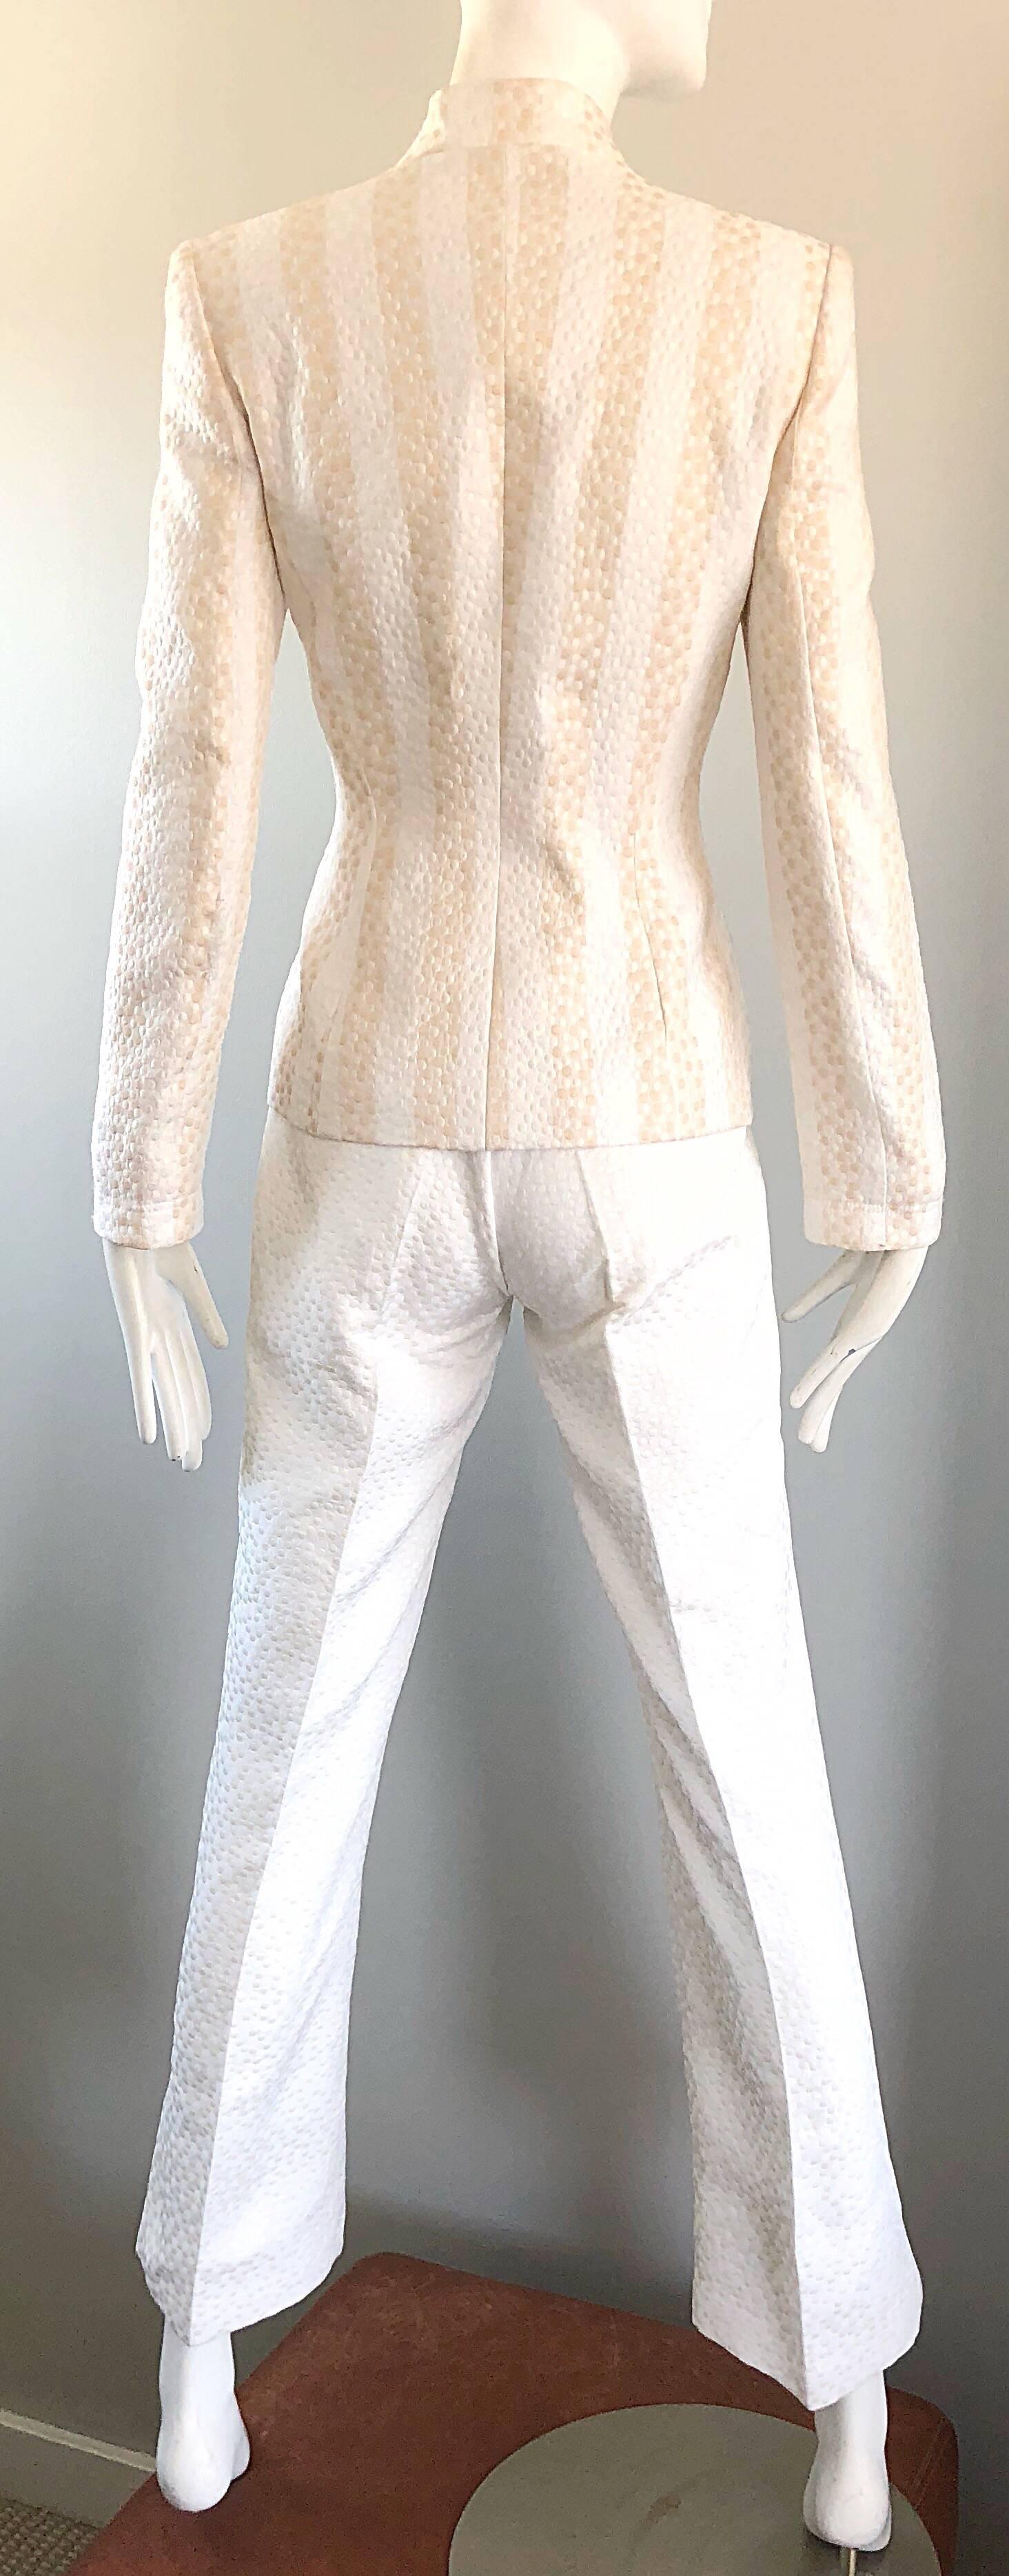 Vintage Max Nugus Couture 1990s White + Beige Polka Dot 90s Tailored Pant Suit 7